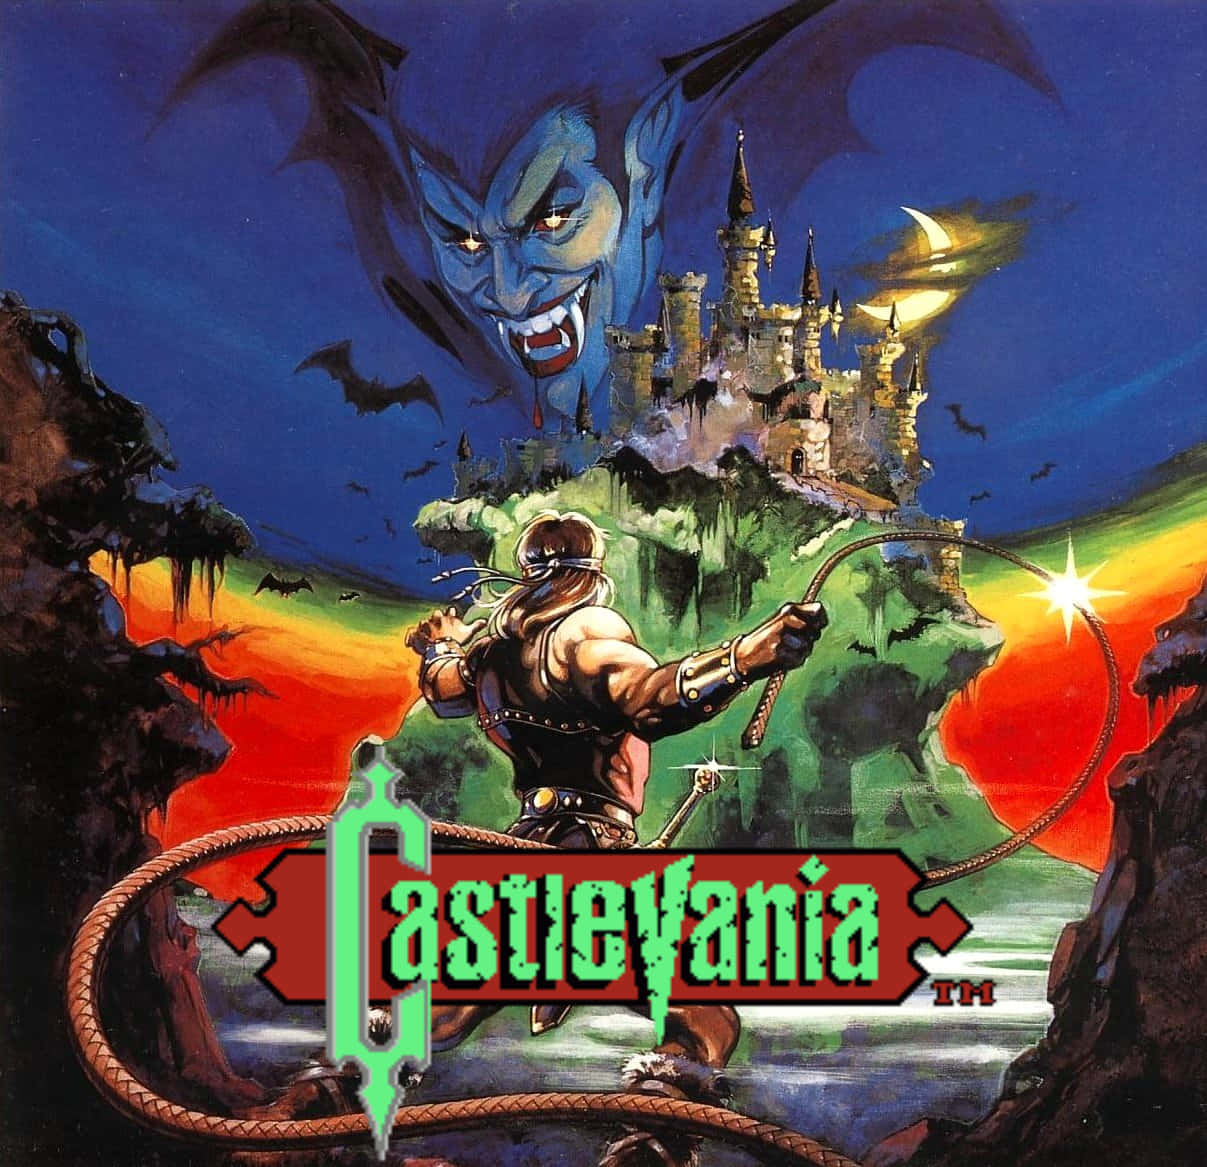 Exploring Count Dracula's eerie castle in the Castlevania video game